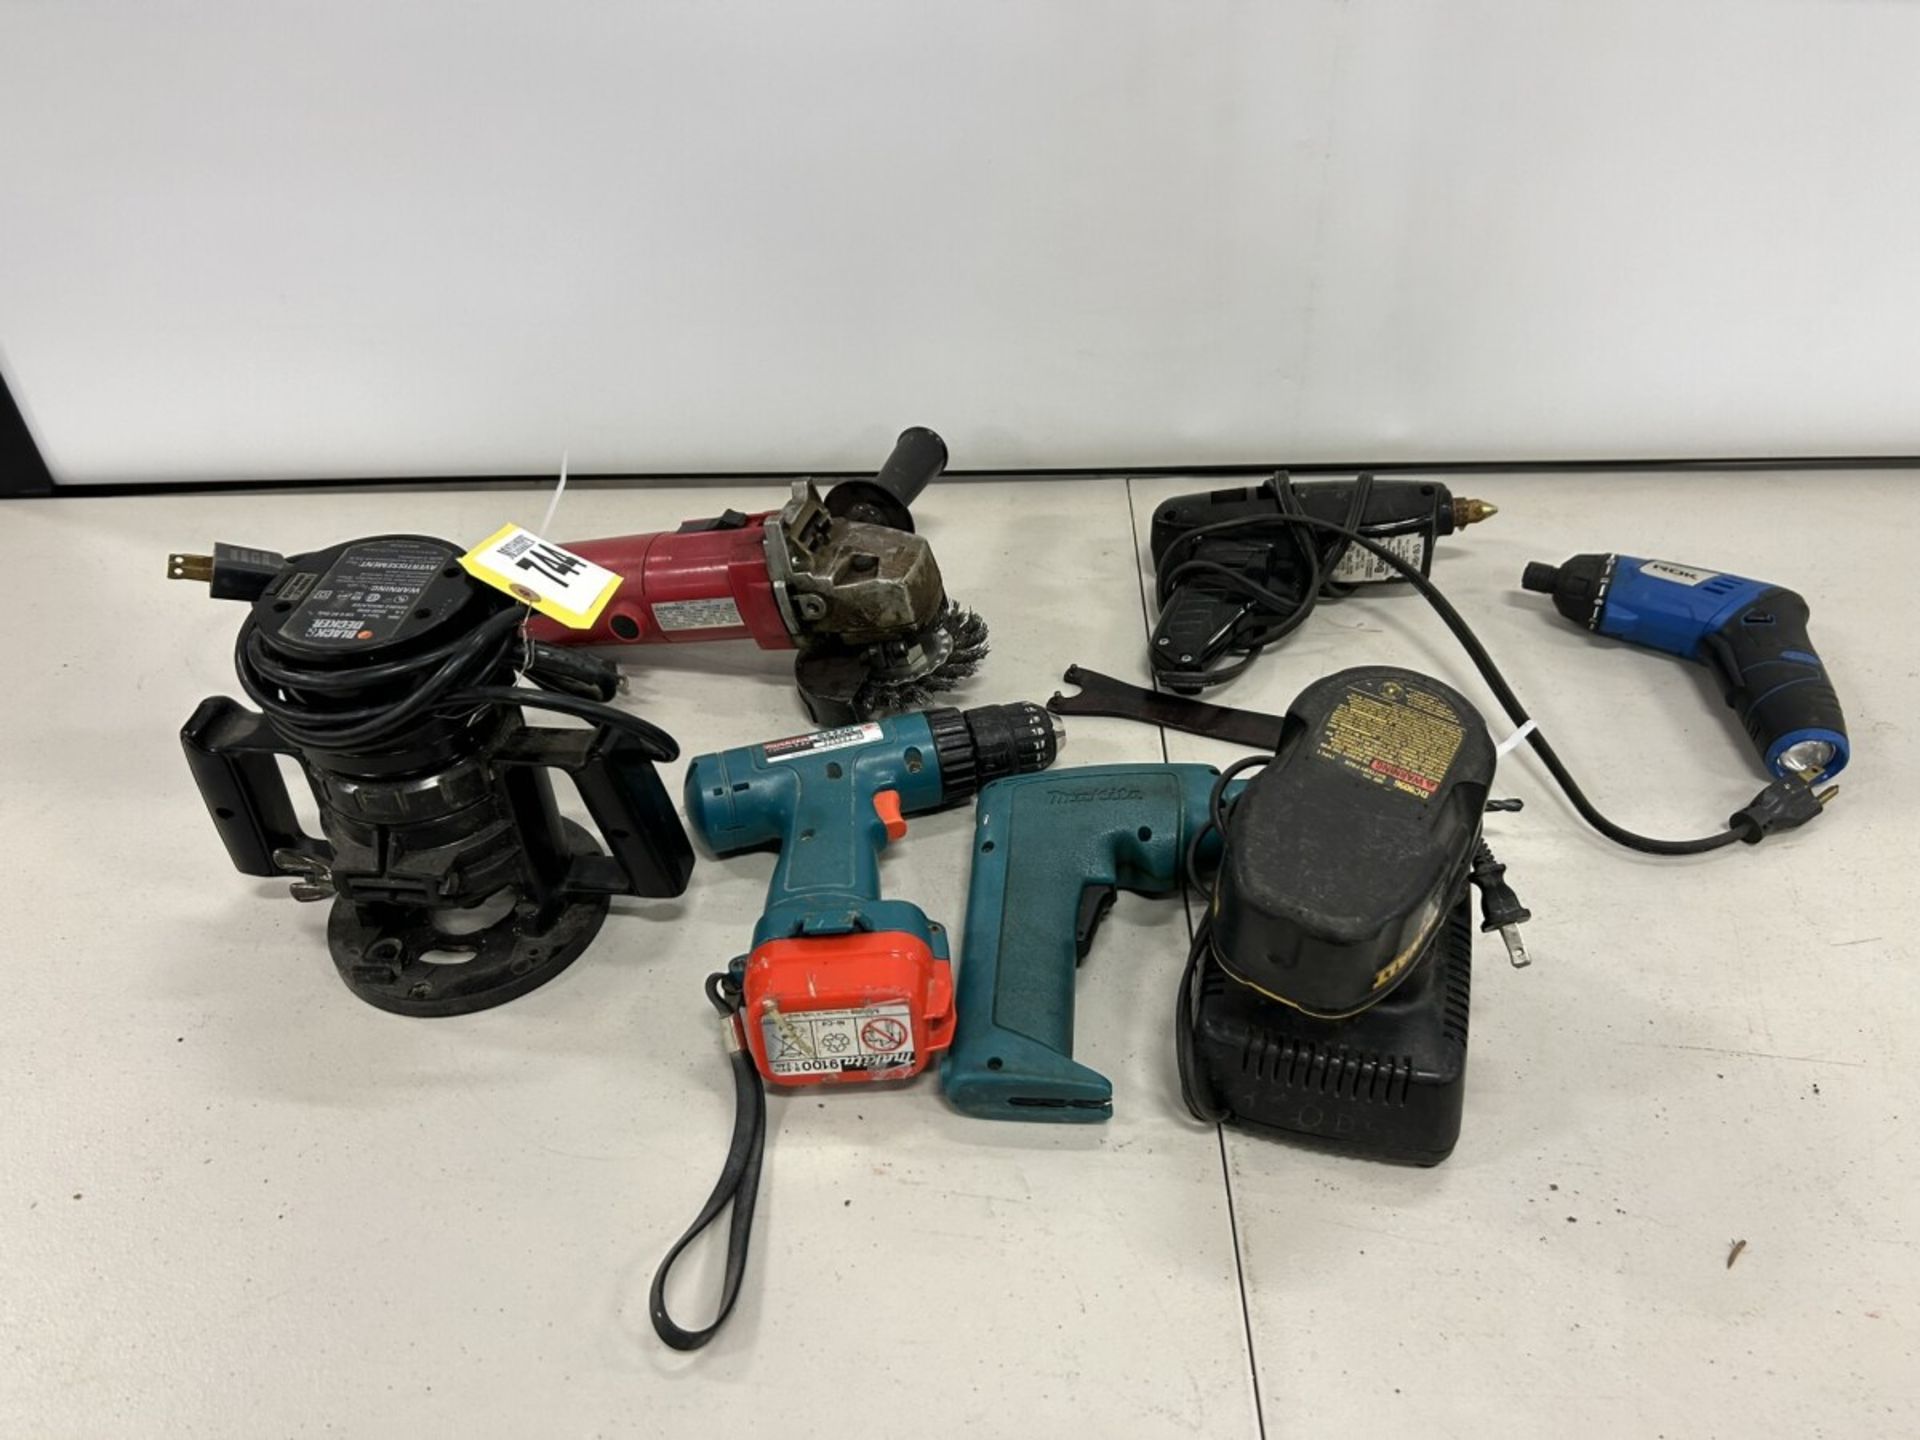 MAKITA CORDLESS DRILLS, DEWALT BATTERY AND CHARGER, BLACK & DECKER ROUTER ETC.